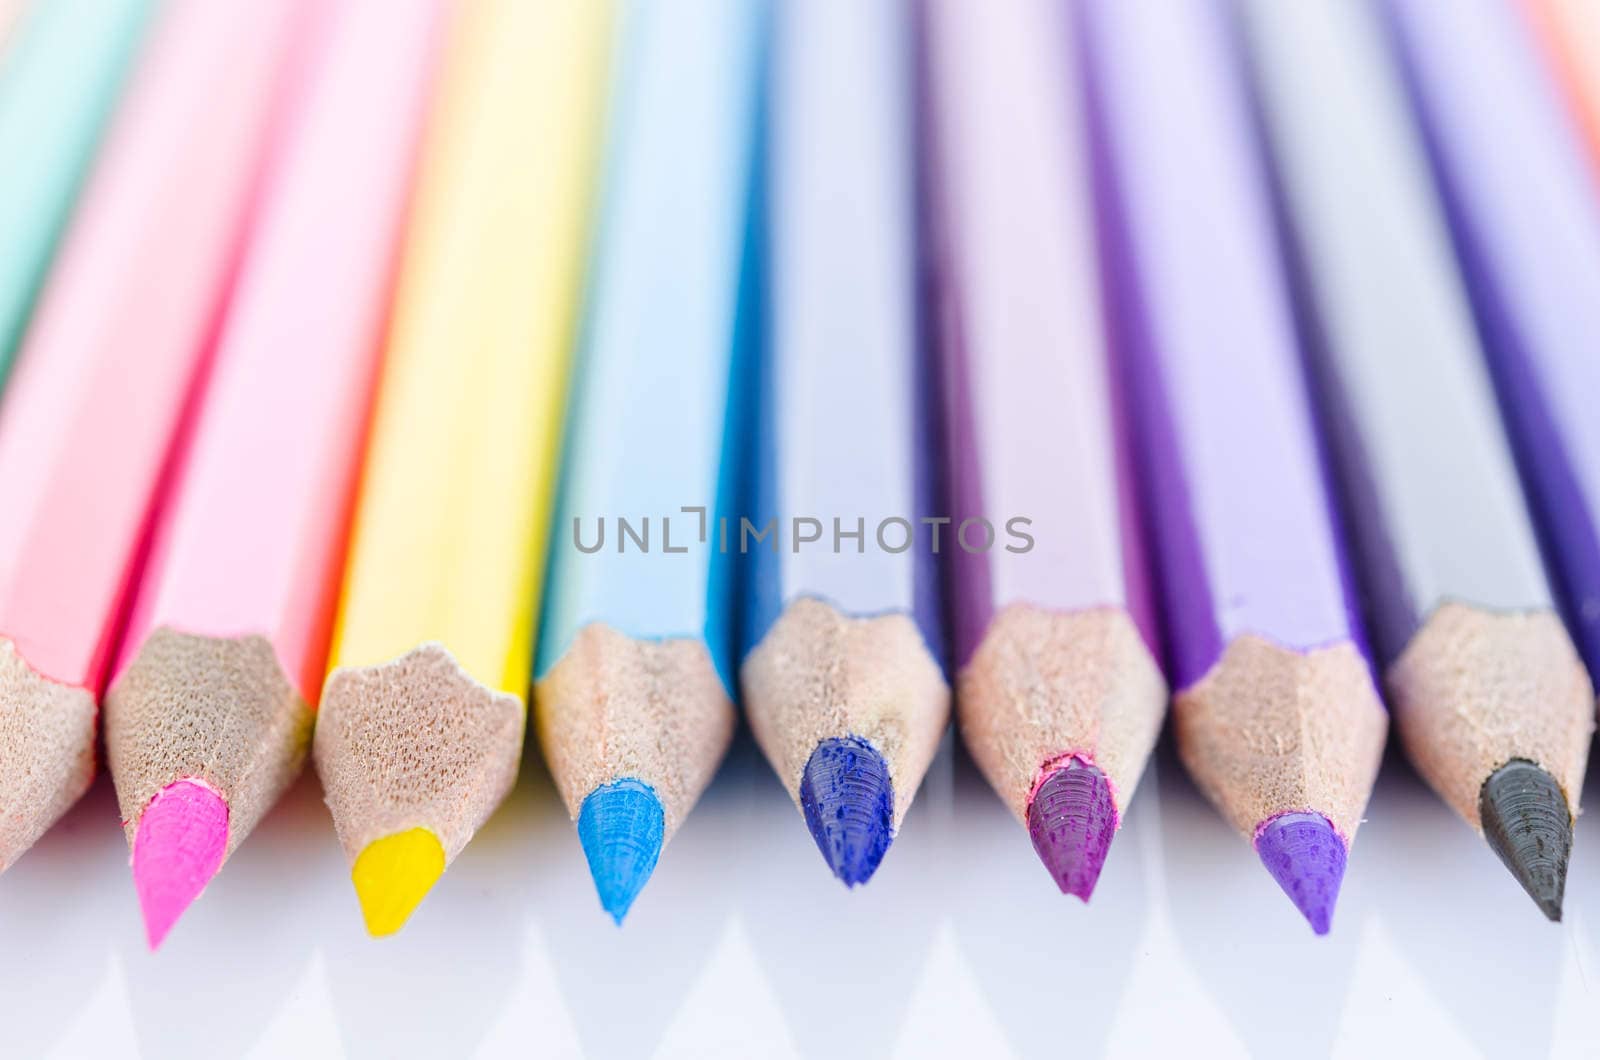 line of colored pencils with shadow on white background